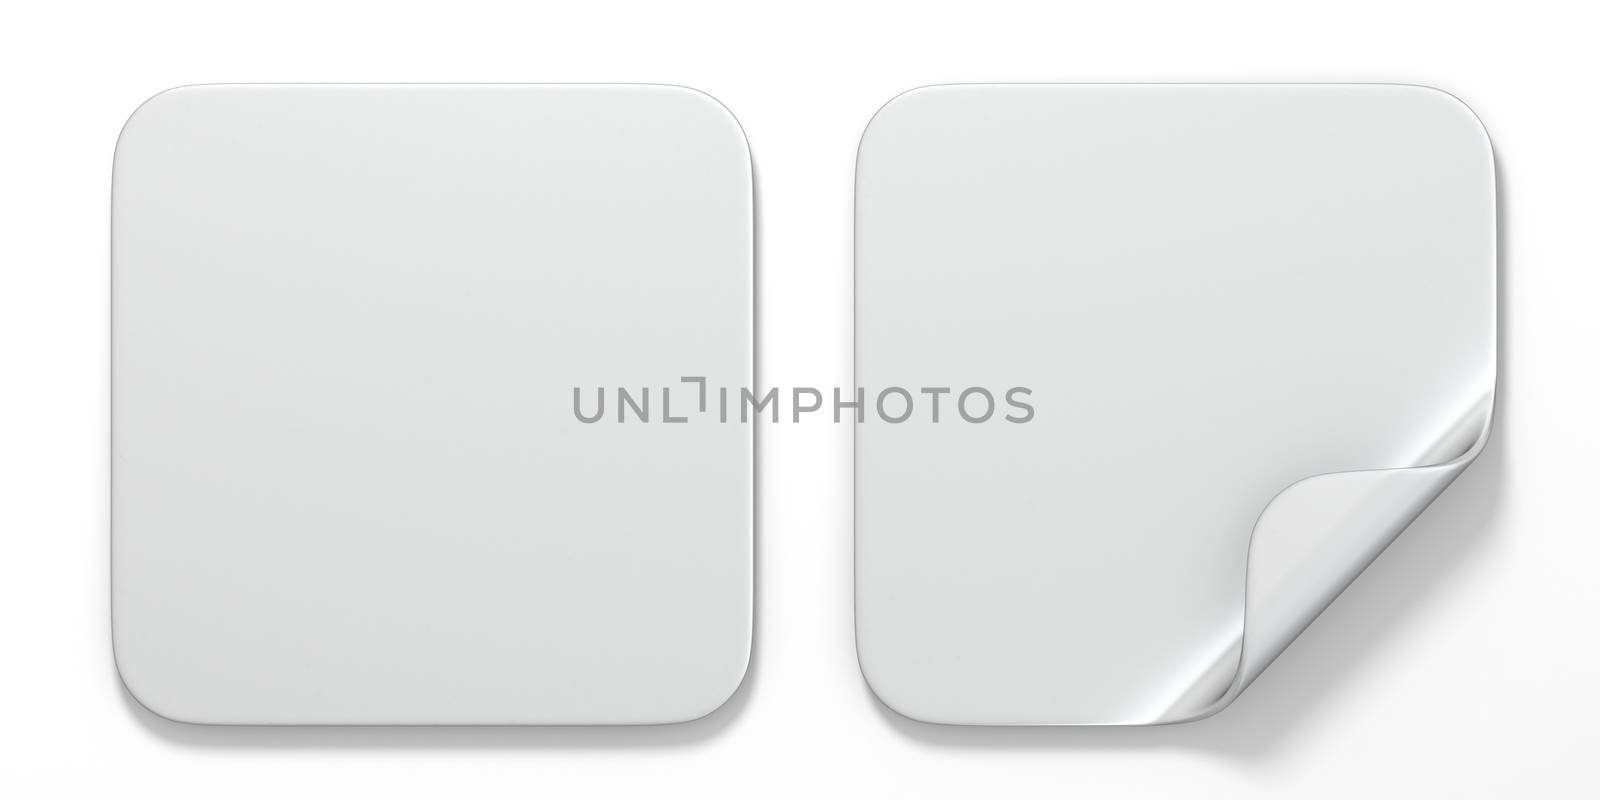 Blank white square stickers with curved corner 3D render illustration isolated on white background